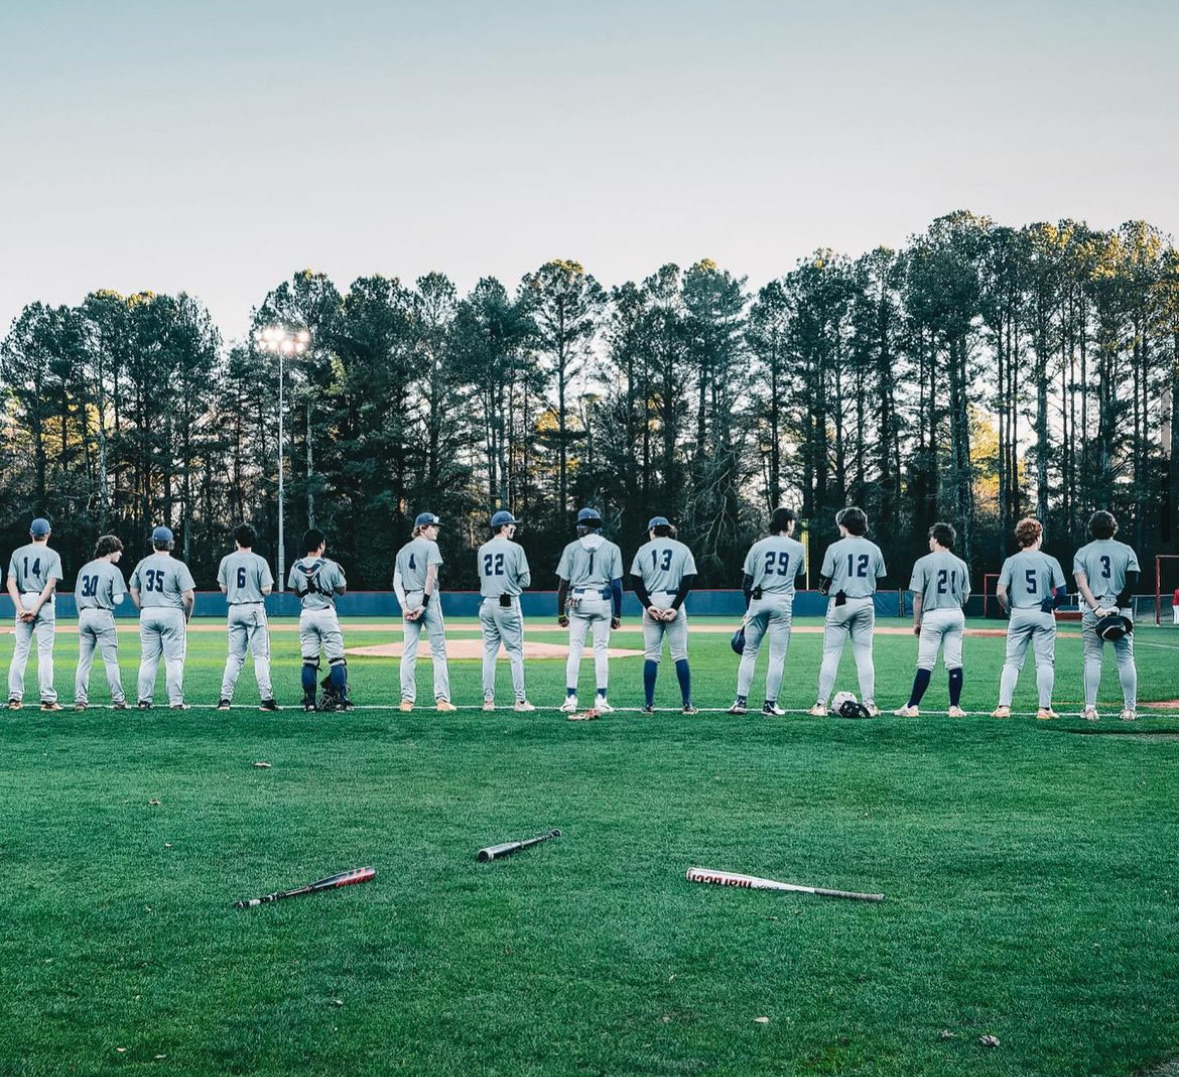 Chamblee%E2%80%99s+Varsity+Baseball+team+lined+up+on+the+first+baseline.%0APhoto+courtesy+of+Cooper+Hill